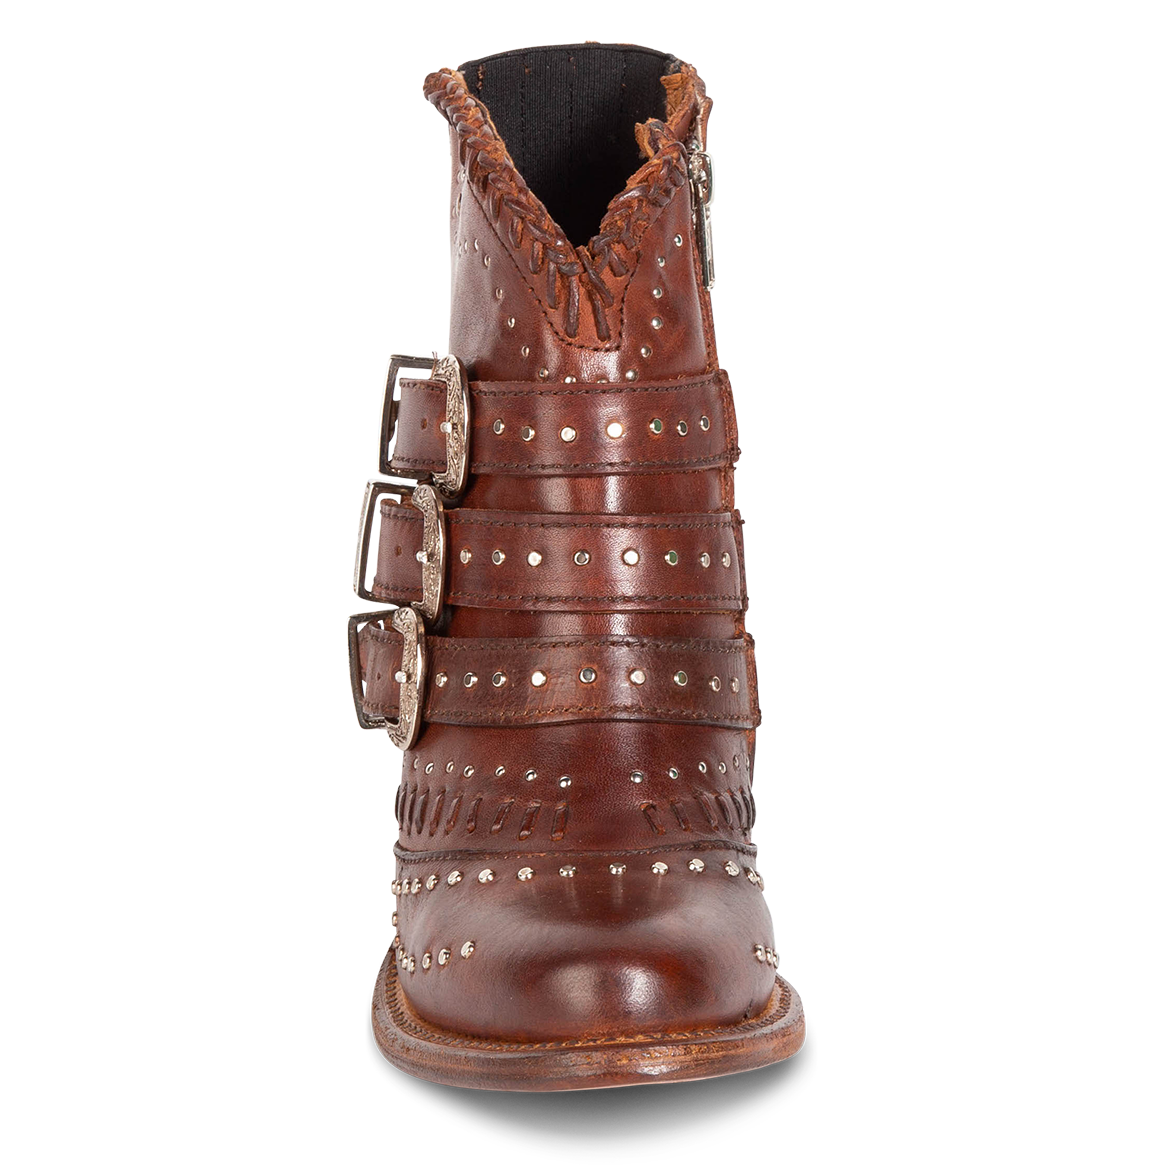 Front view showing leather straps with stud detailing on FREEBIRD women's Savanna cognac leather ankle bootie